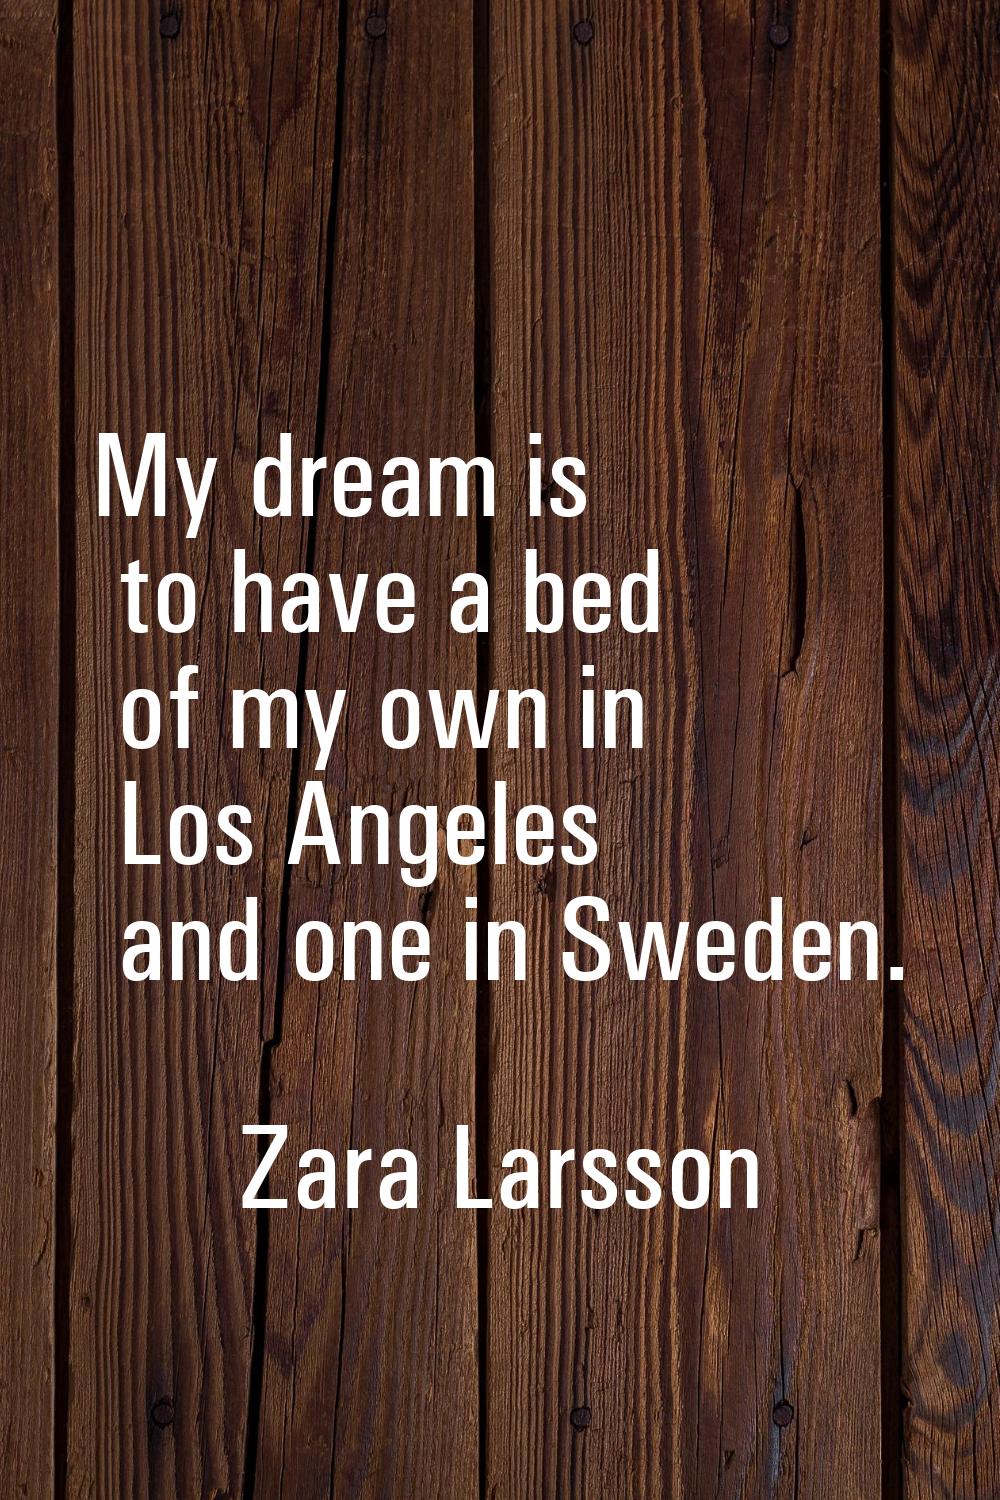 My dream is to have a bed of my own in Los Angeles and one in Sweden.